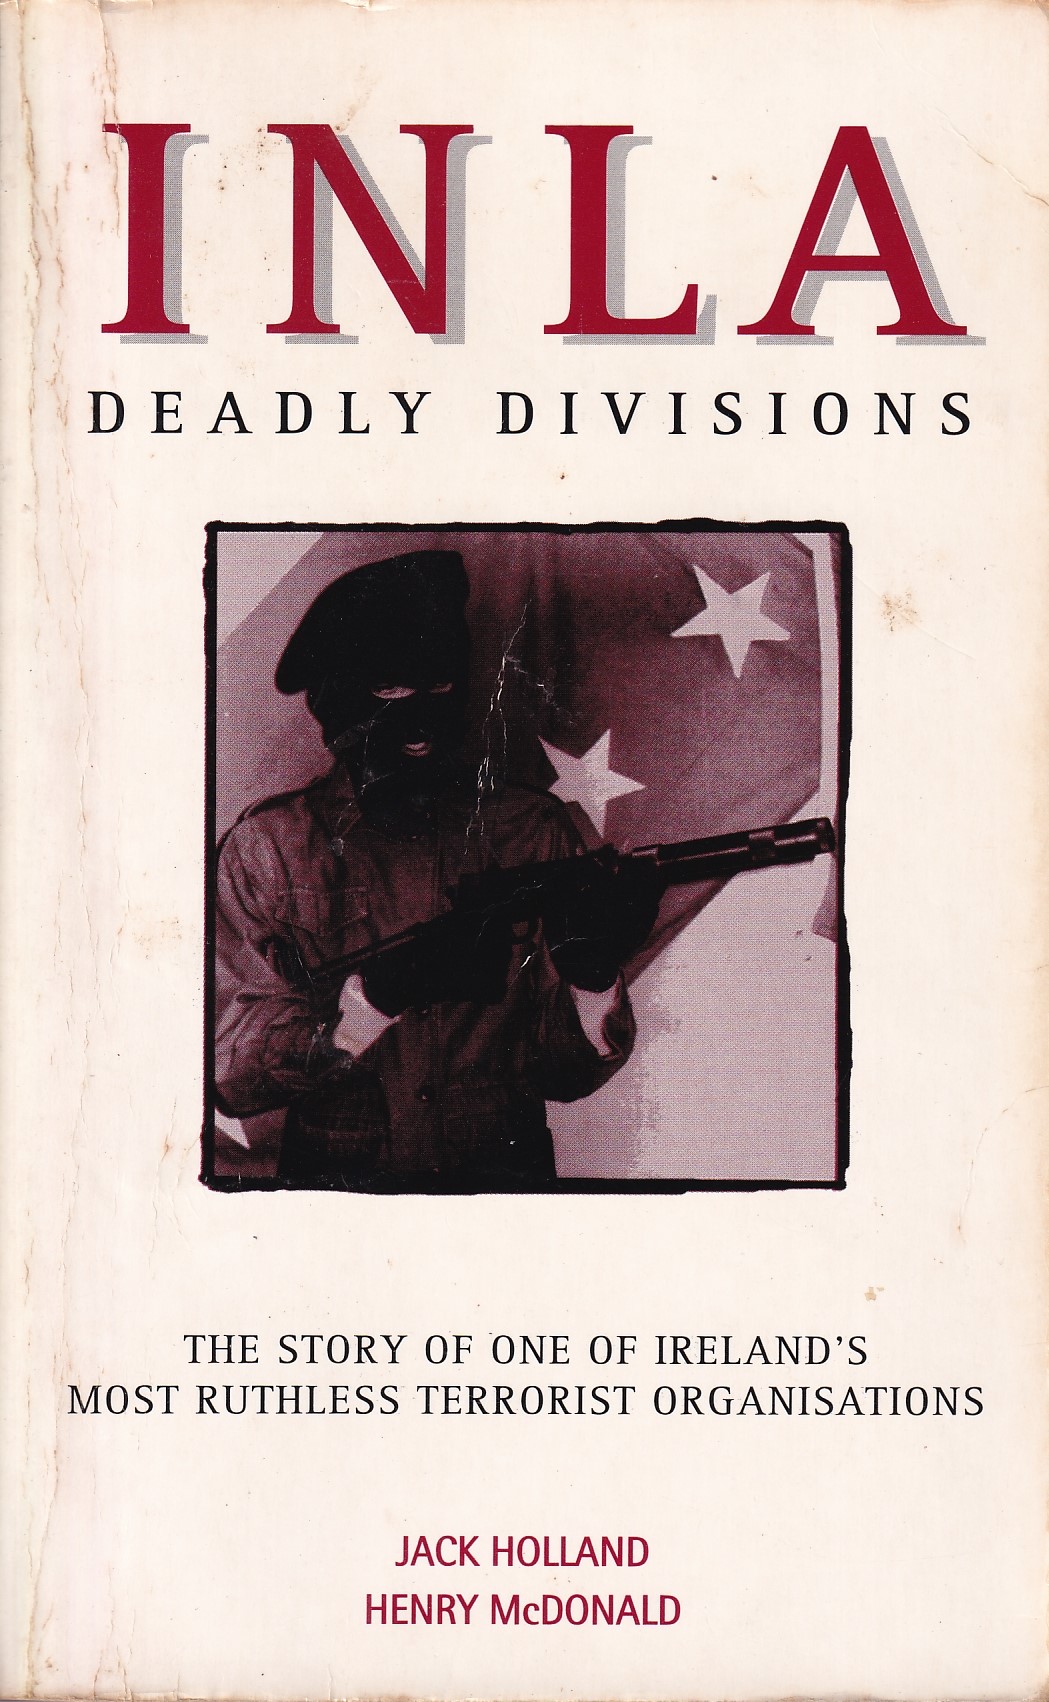 INLA: Deadly Divisions – The Story of One of Ireland’s Most Ruthless Terrorist Organisations | Jack Holland & Henry McDonald | Charlie Byrne's